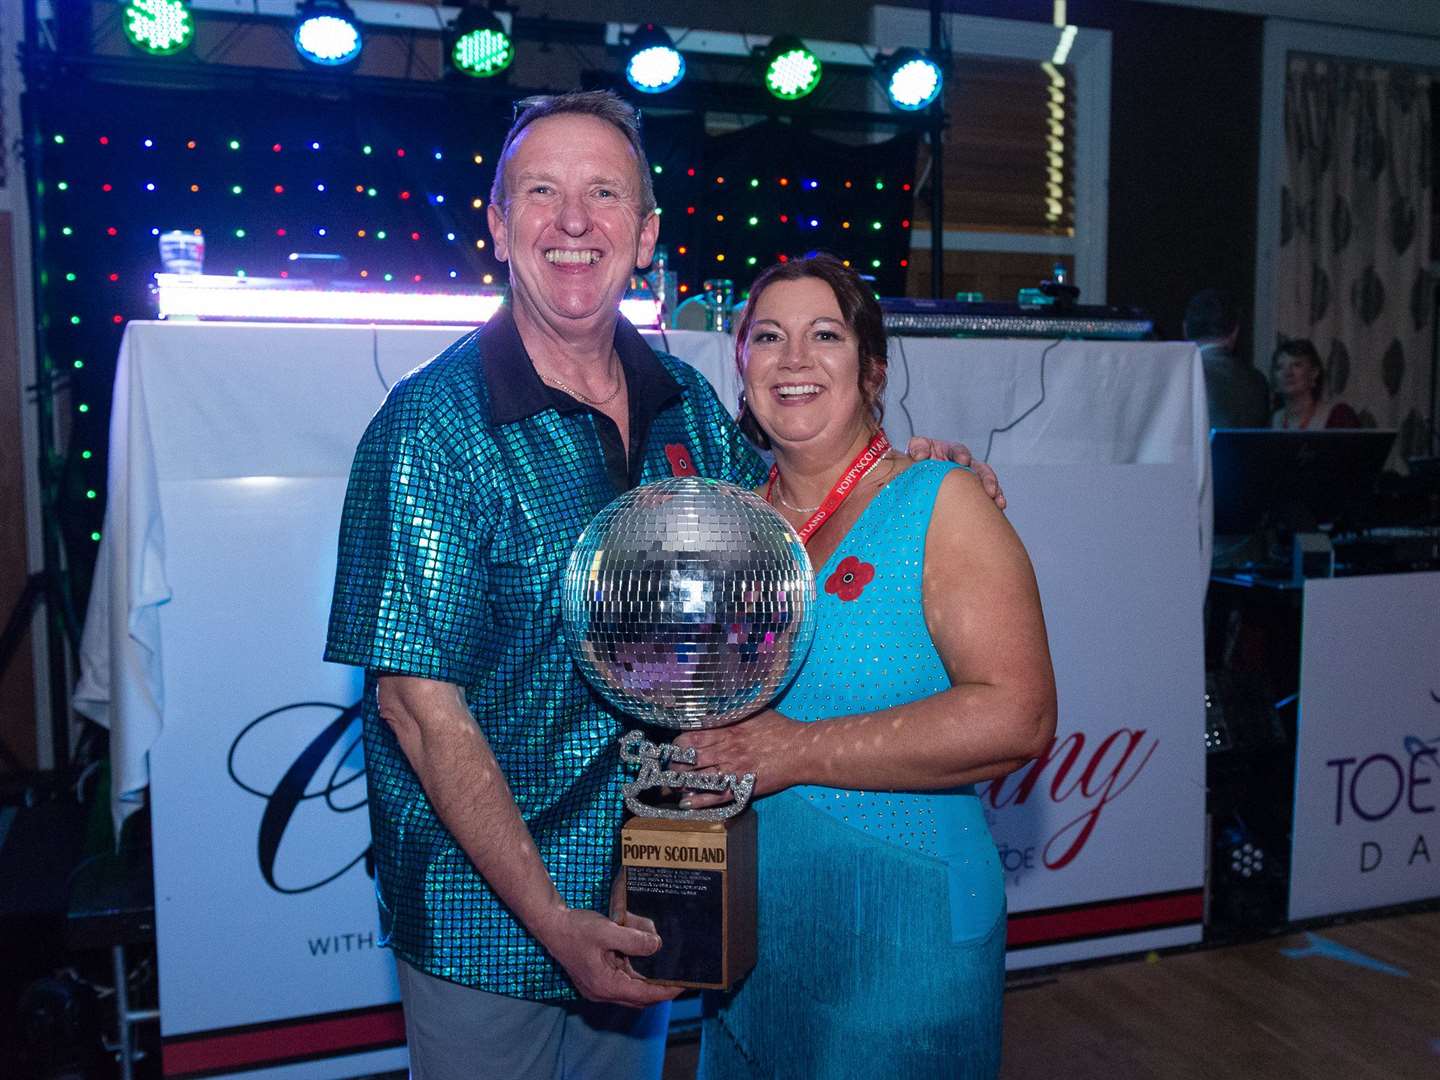 Come Dancing with Poppyscotland winners Barry Hirst and Sarah Wilson.